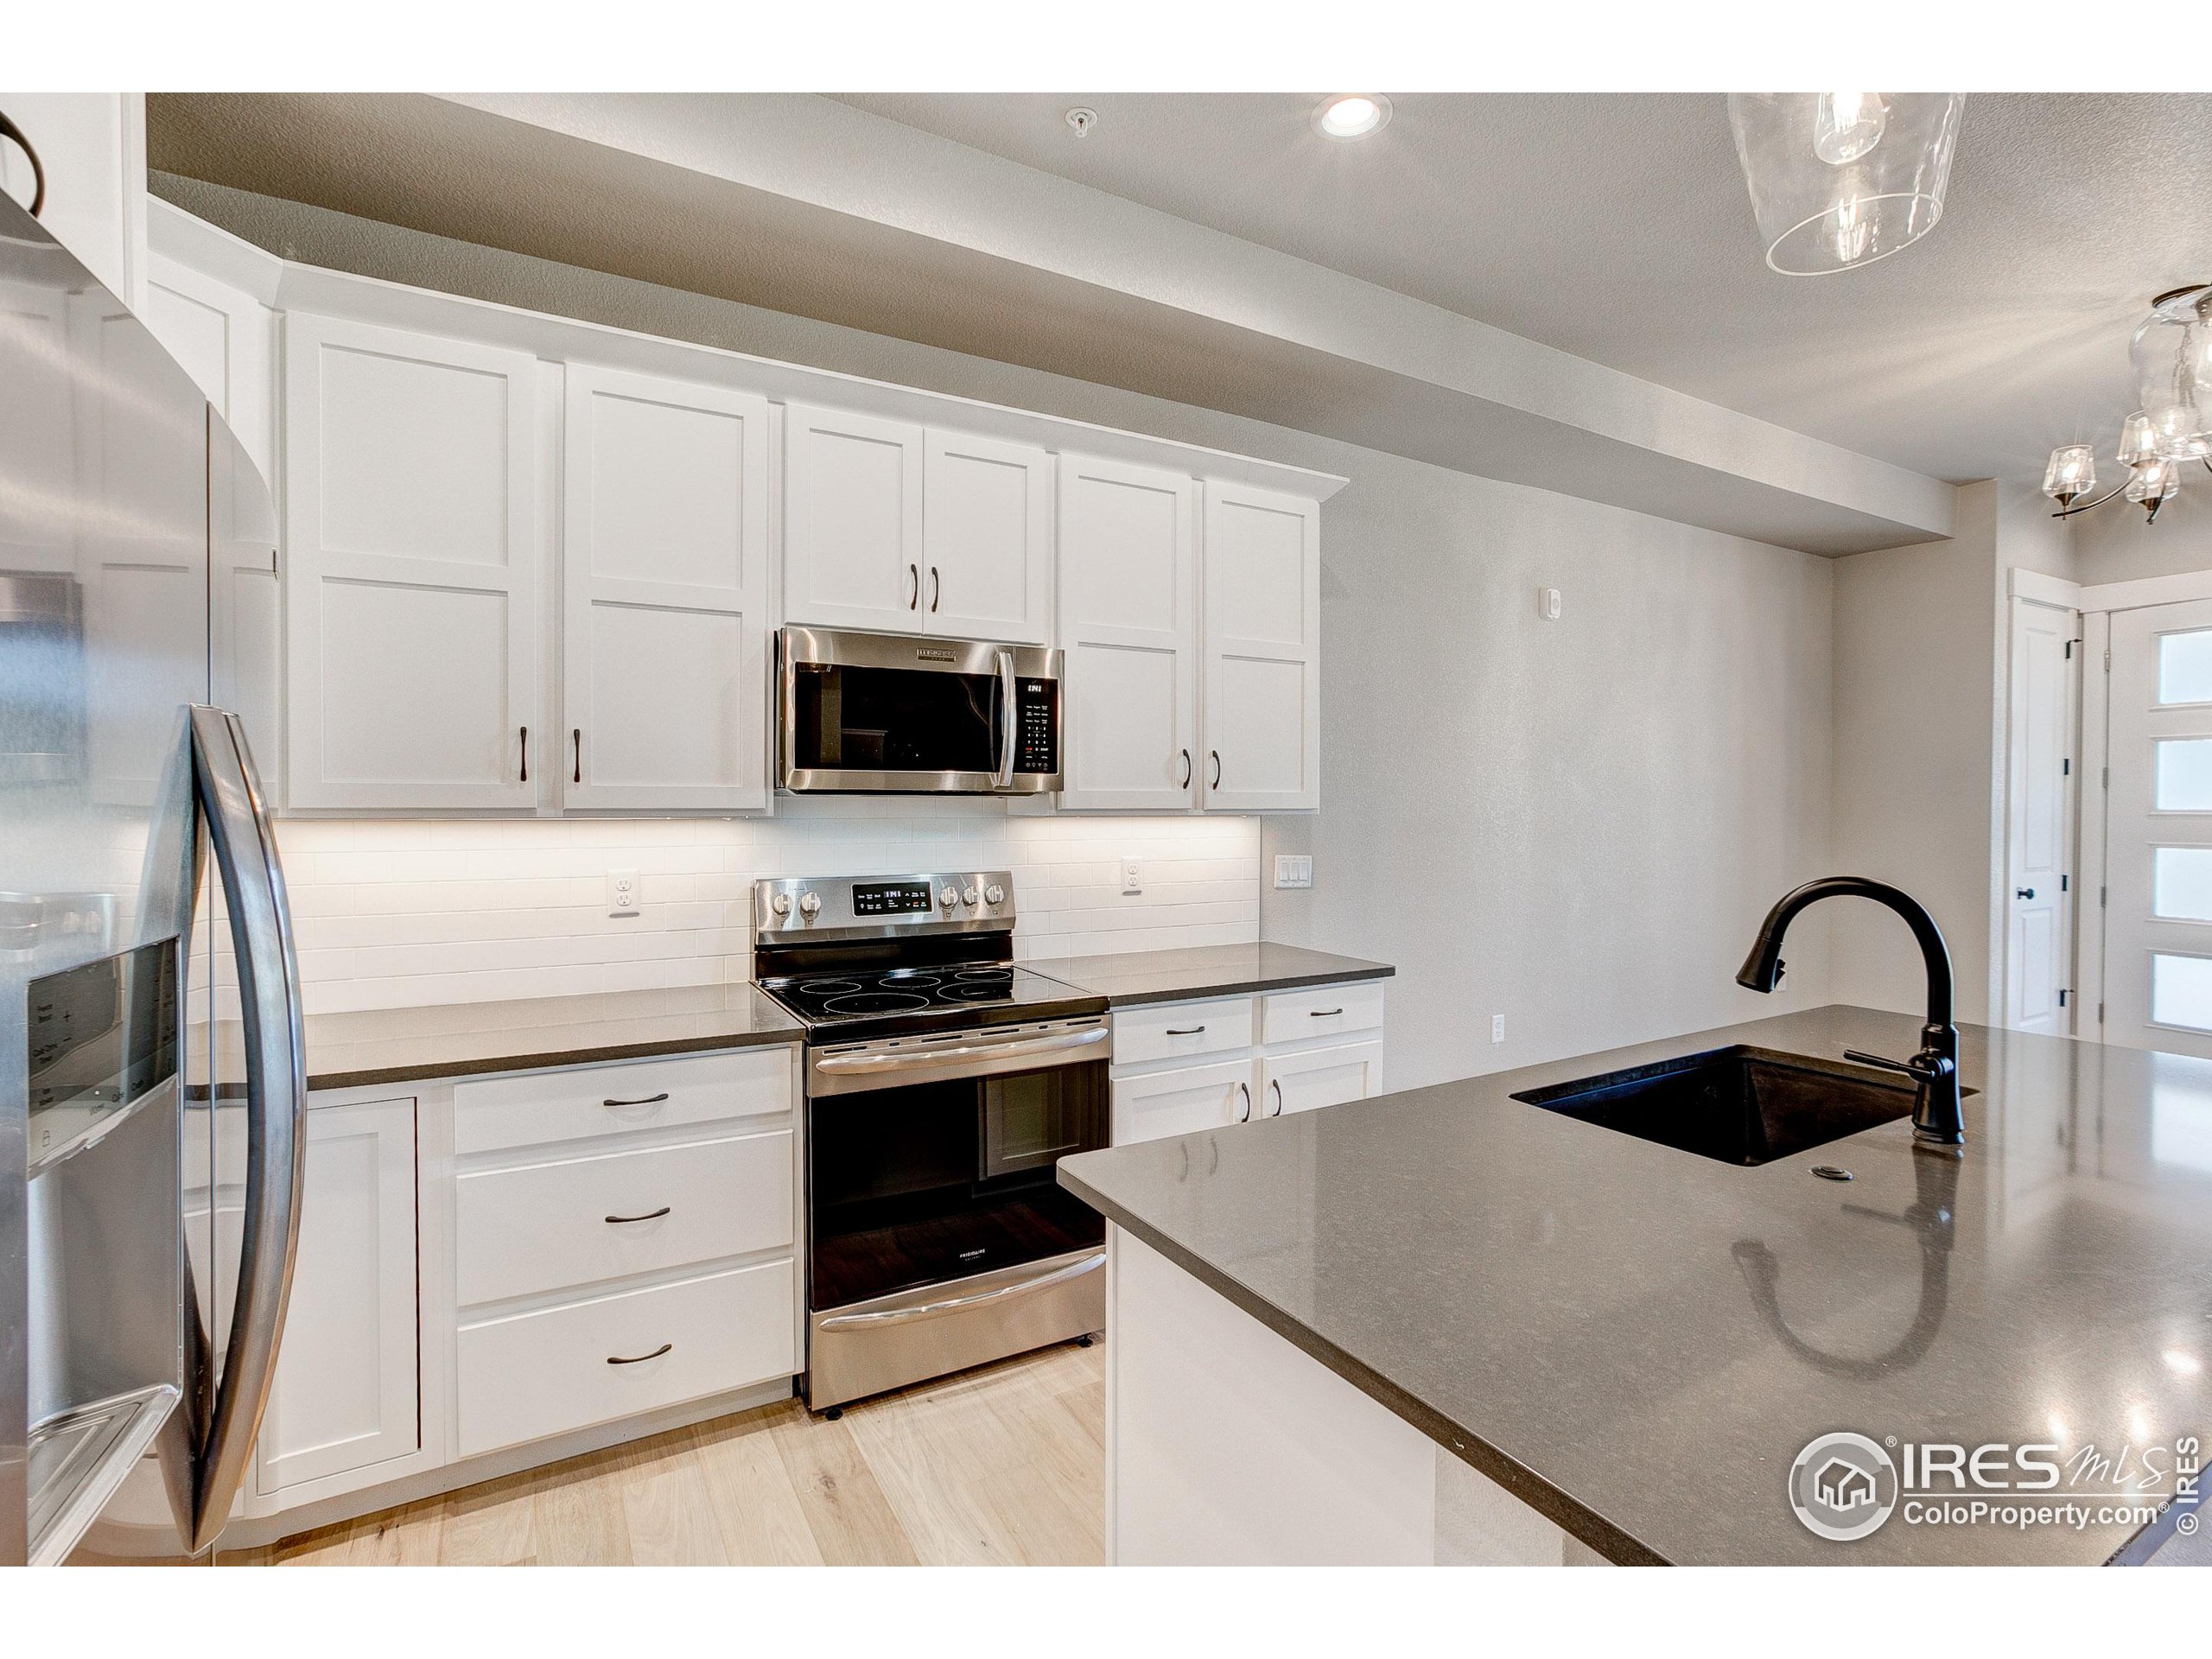 a kitchen with stainless steel appliances kitchen island a white counter top space and cabinets